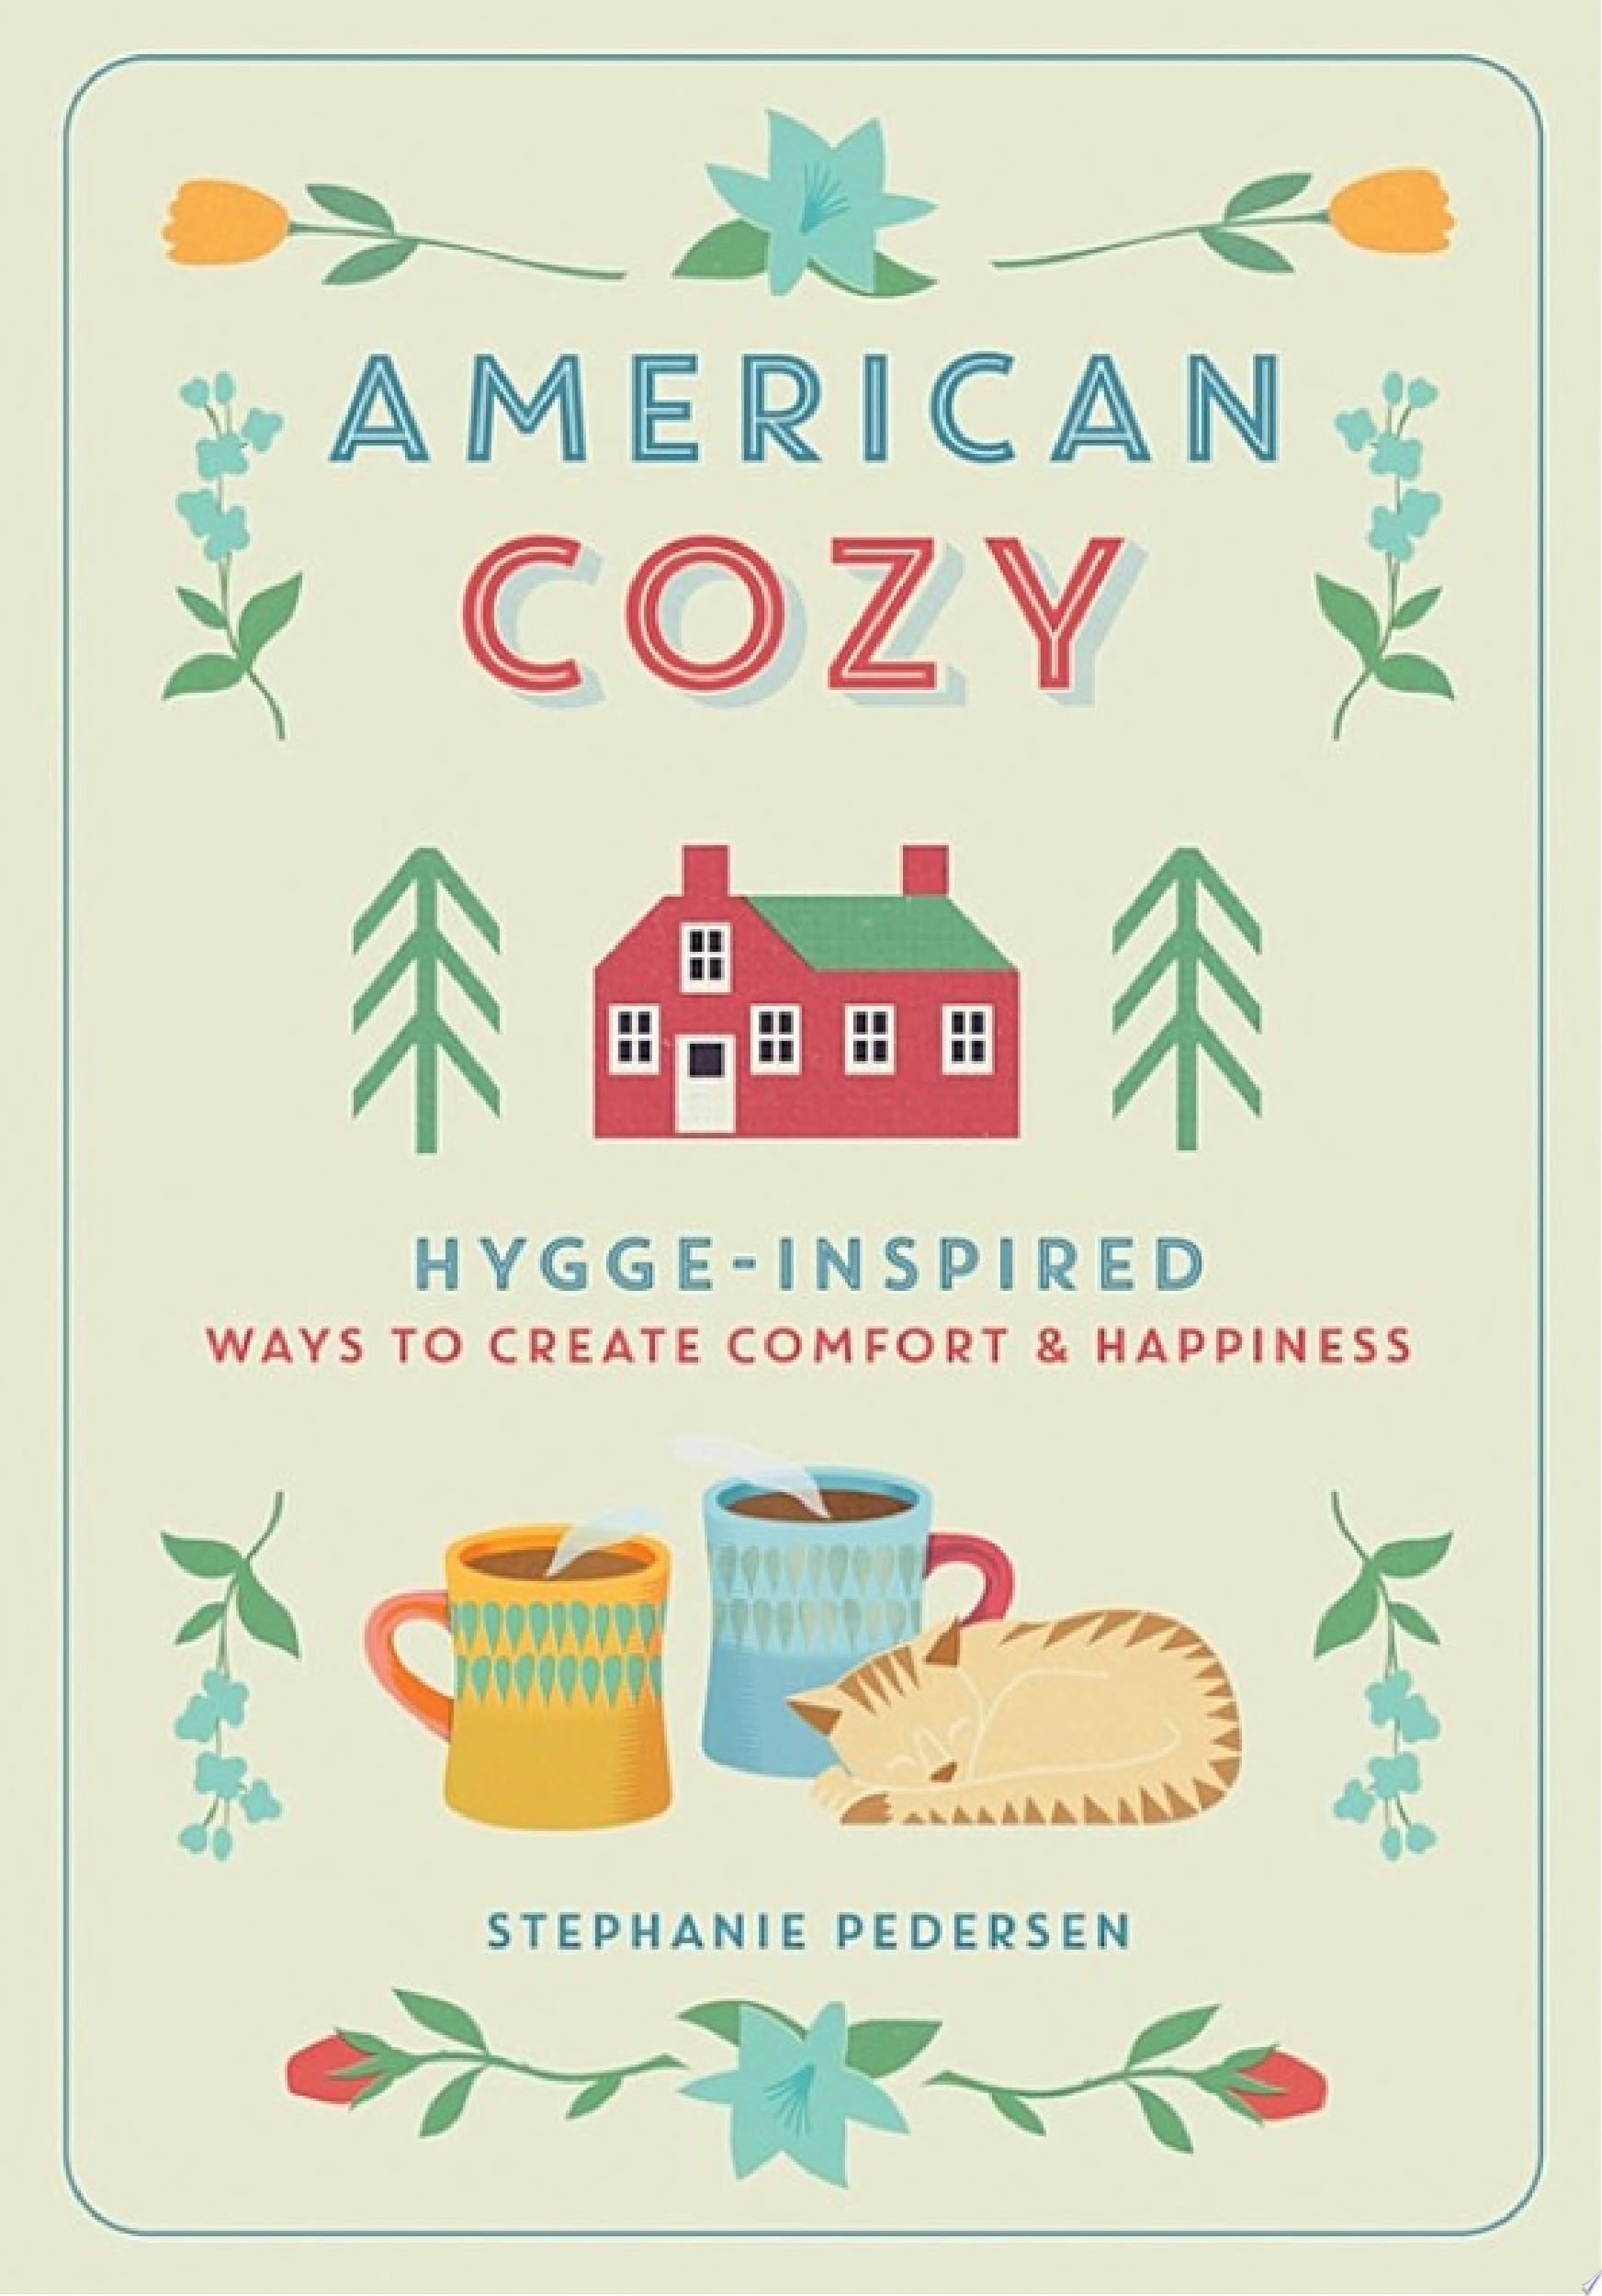 Image for "American Cozy"